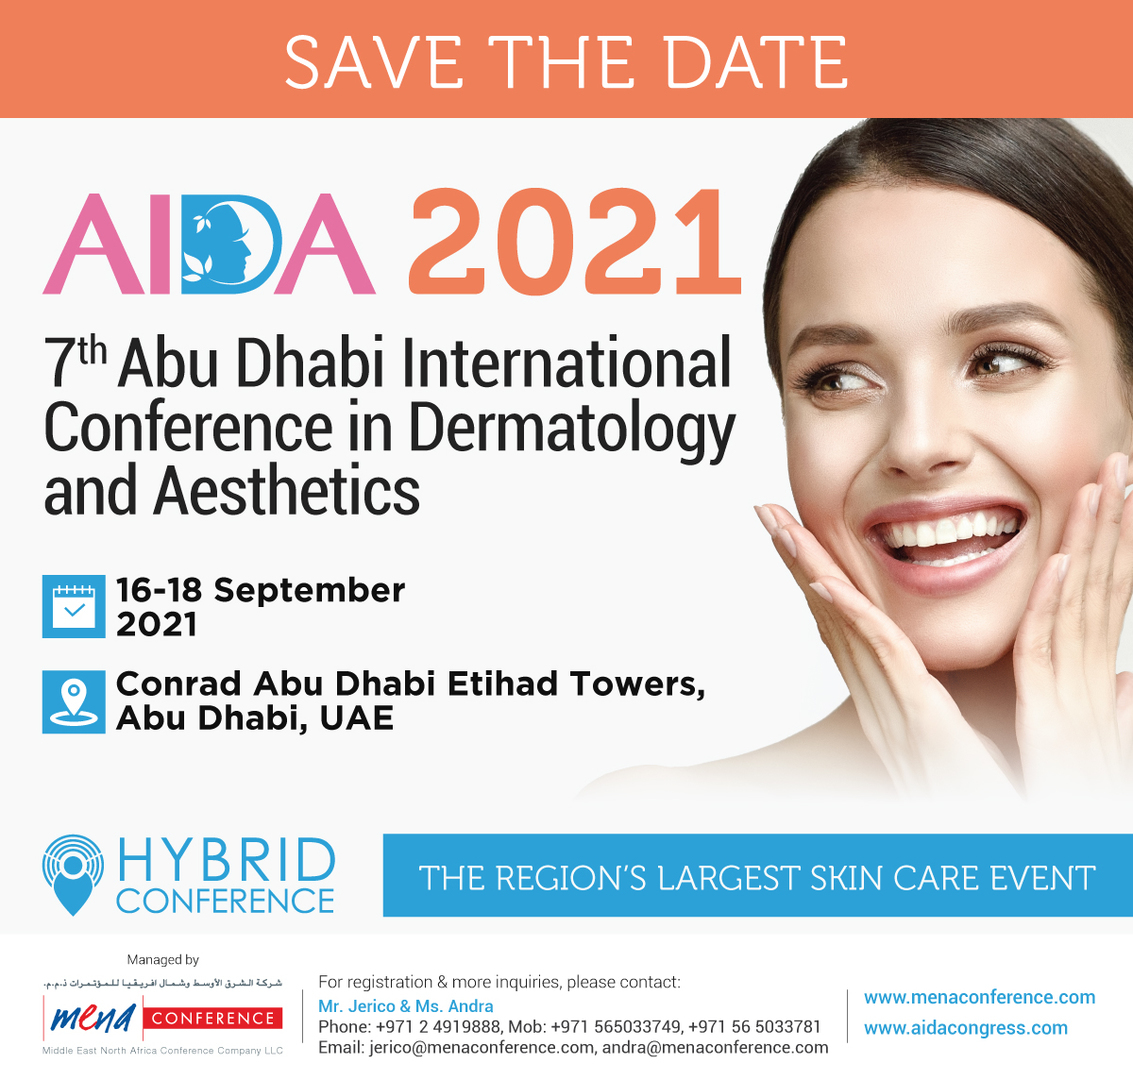 7th Abu Dhabi International Conference in Dermatology and Aesthetics 2021